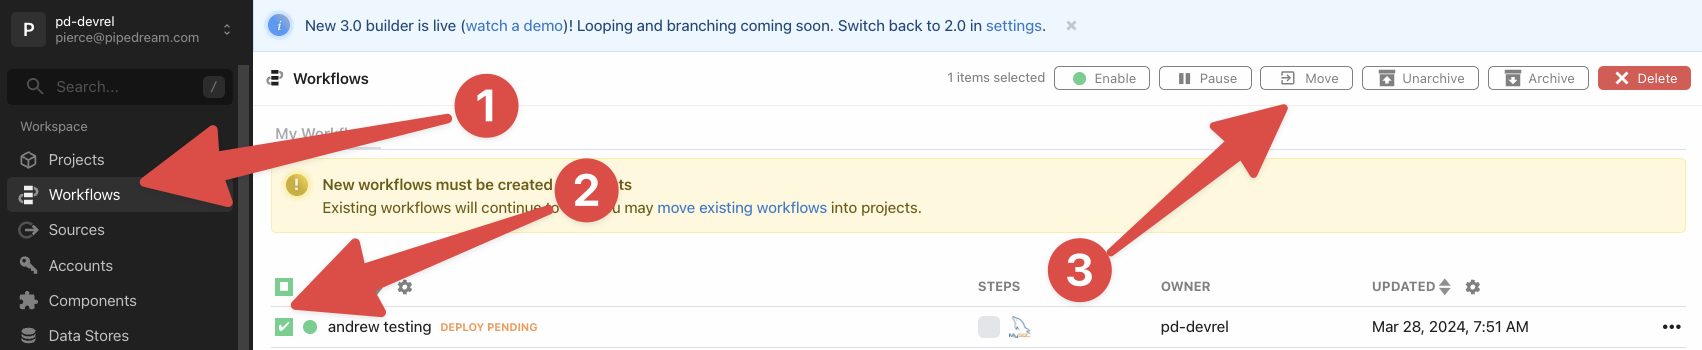 Moving a workflow to a project in the Workflows area of the dashboard